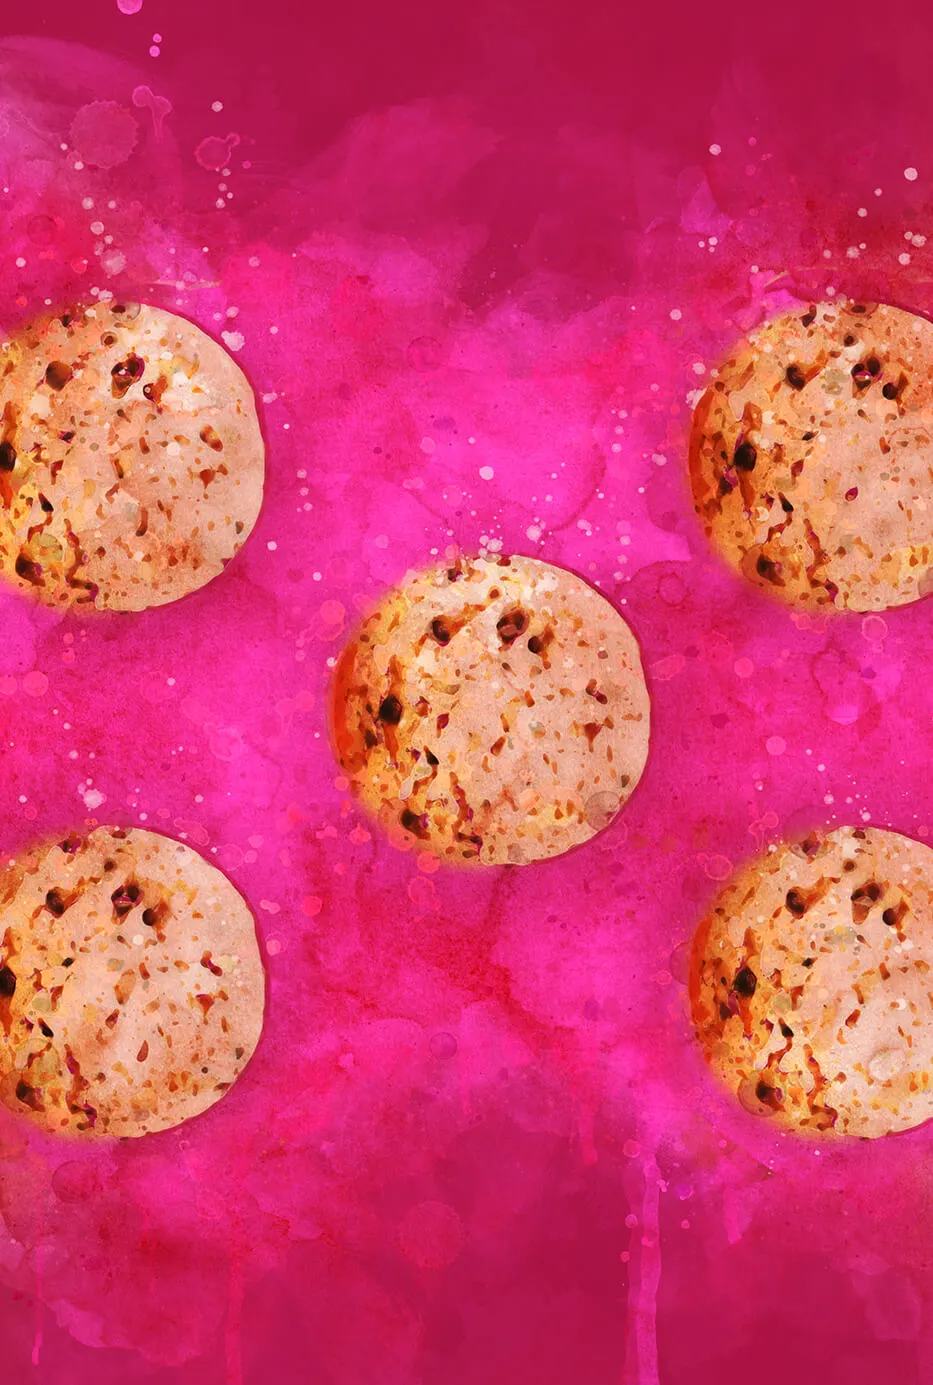 Pink background with five chocolatechip cookies.